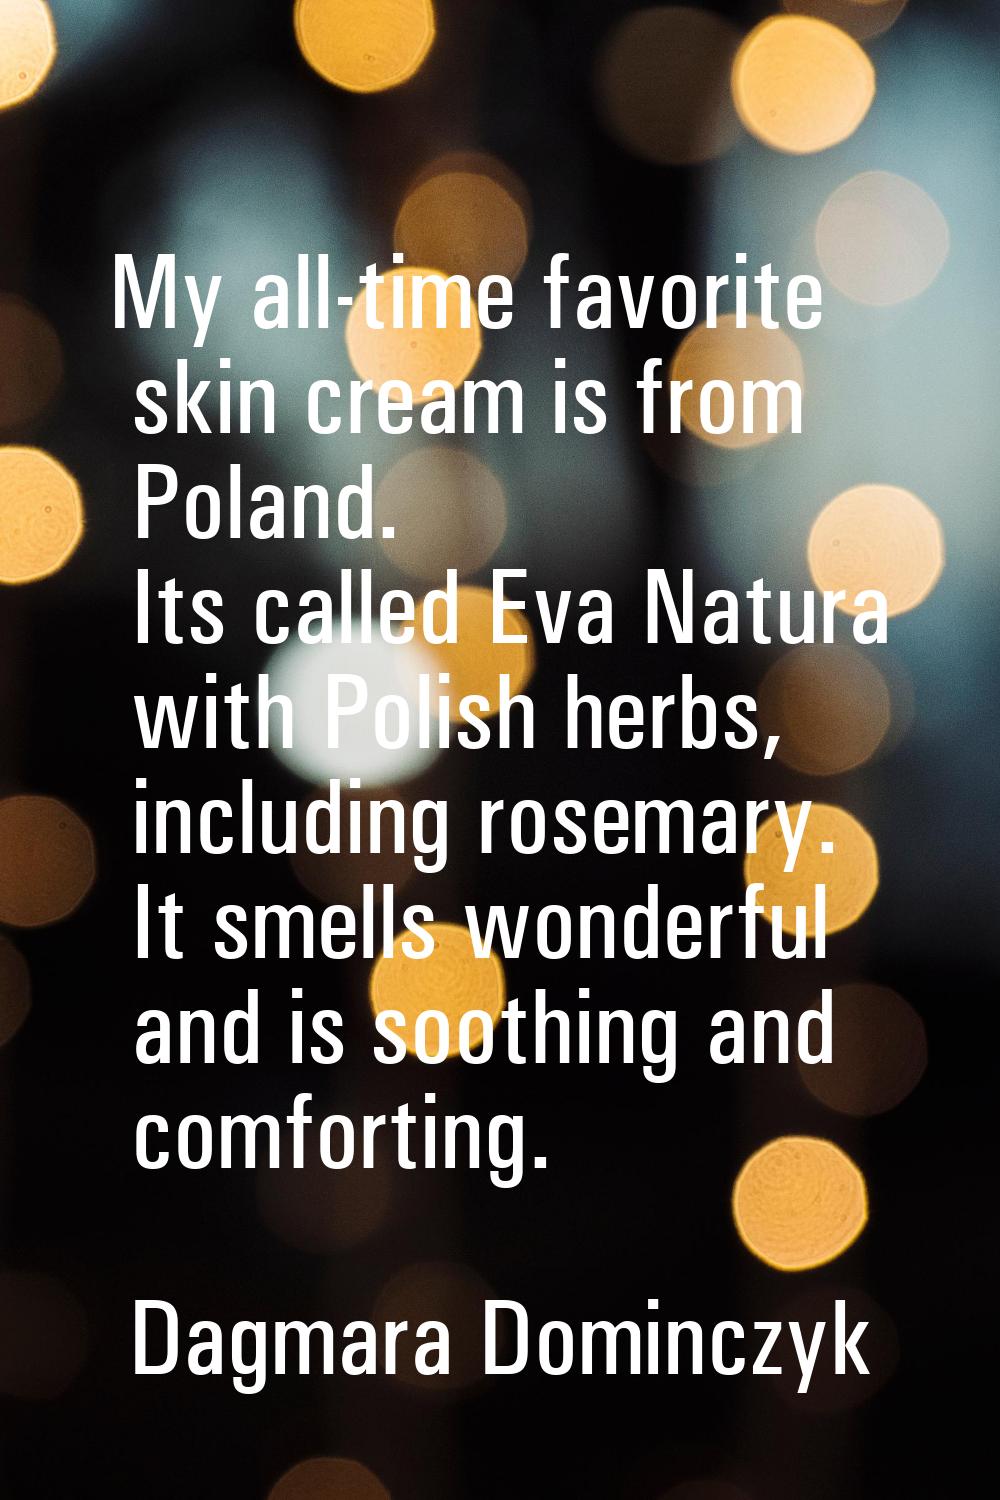 My all-time favorite skin cream is from Poland. Its called Eva Natura with Polish herbs, including 